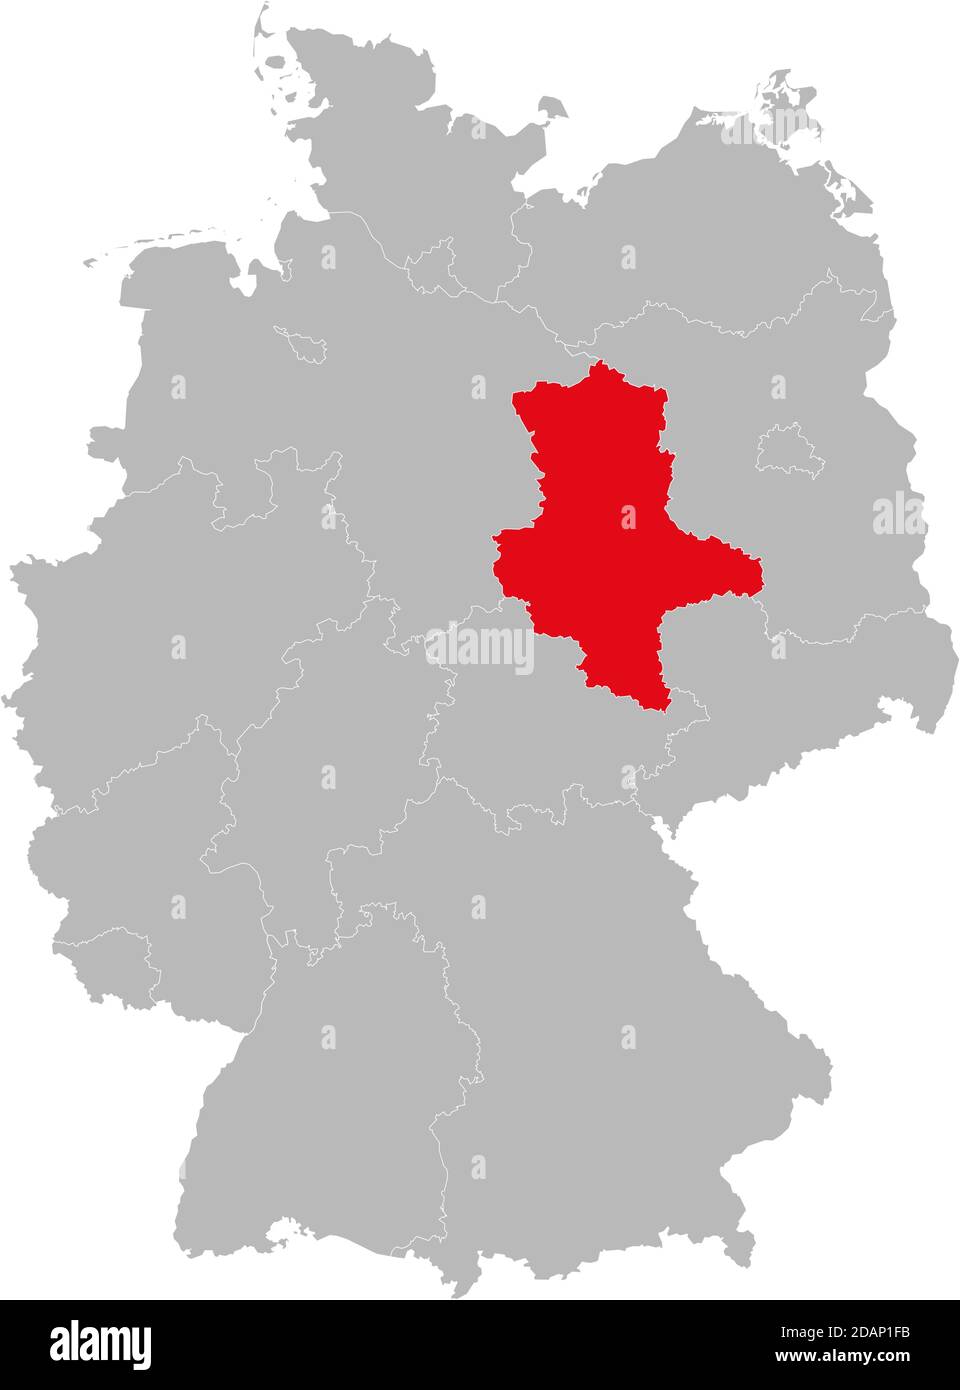 Saxony-Anhalt state isolated on Germany map. Business concepts and backgrounds. Stock Vector